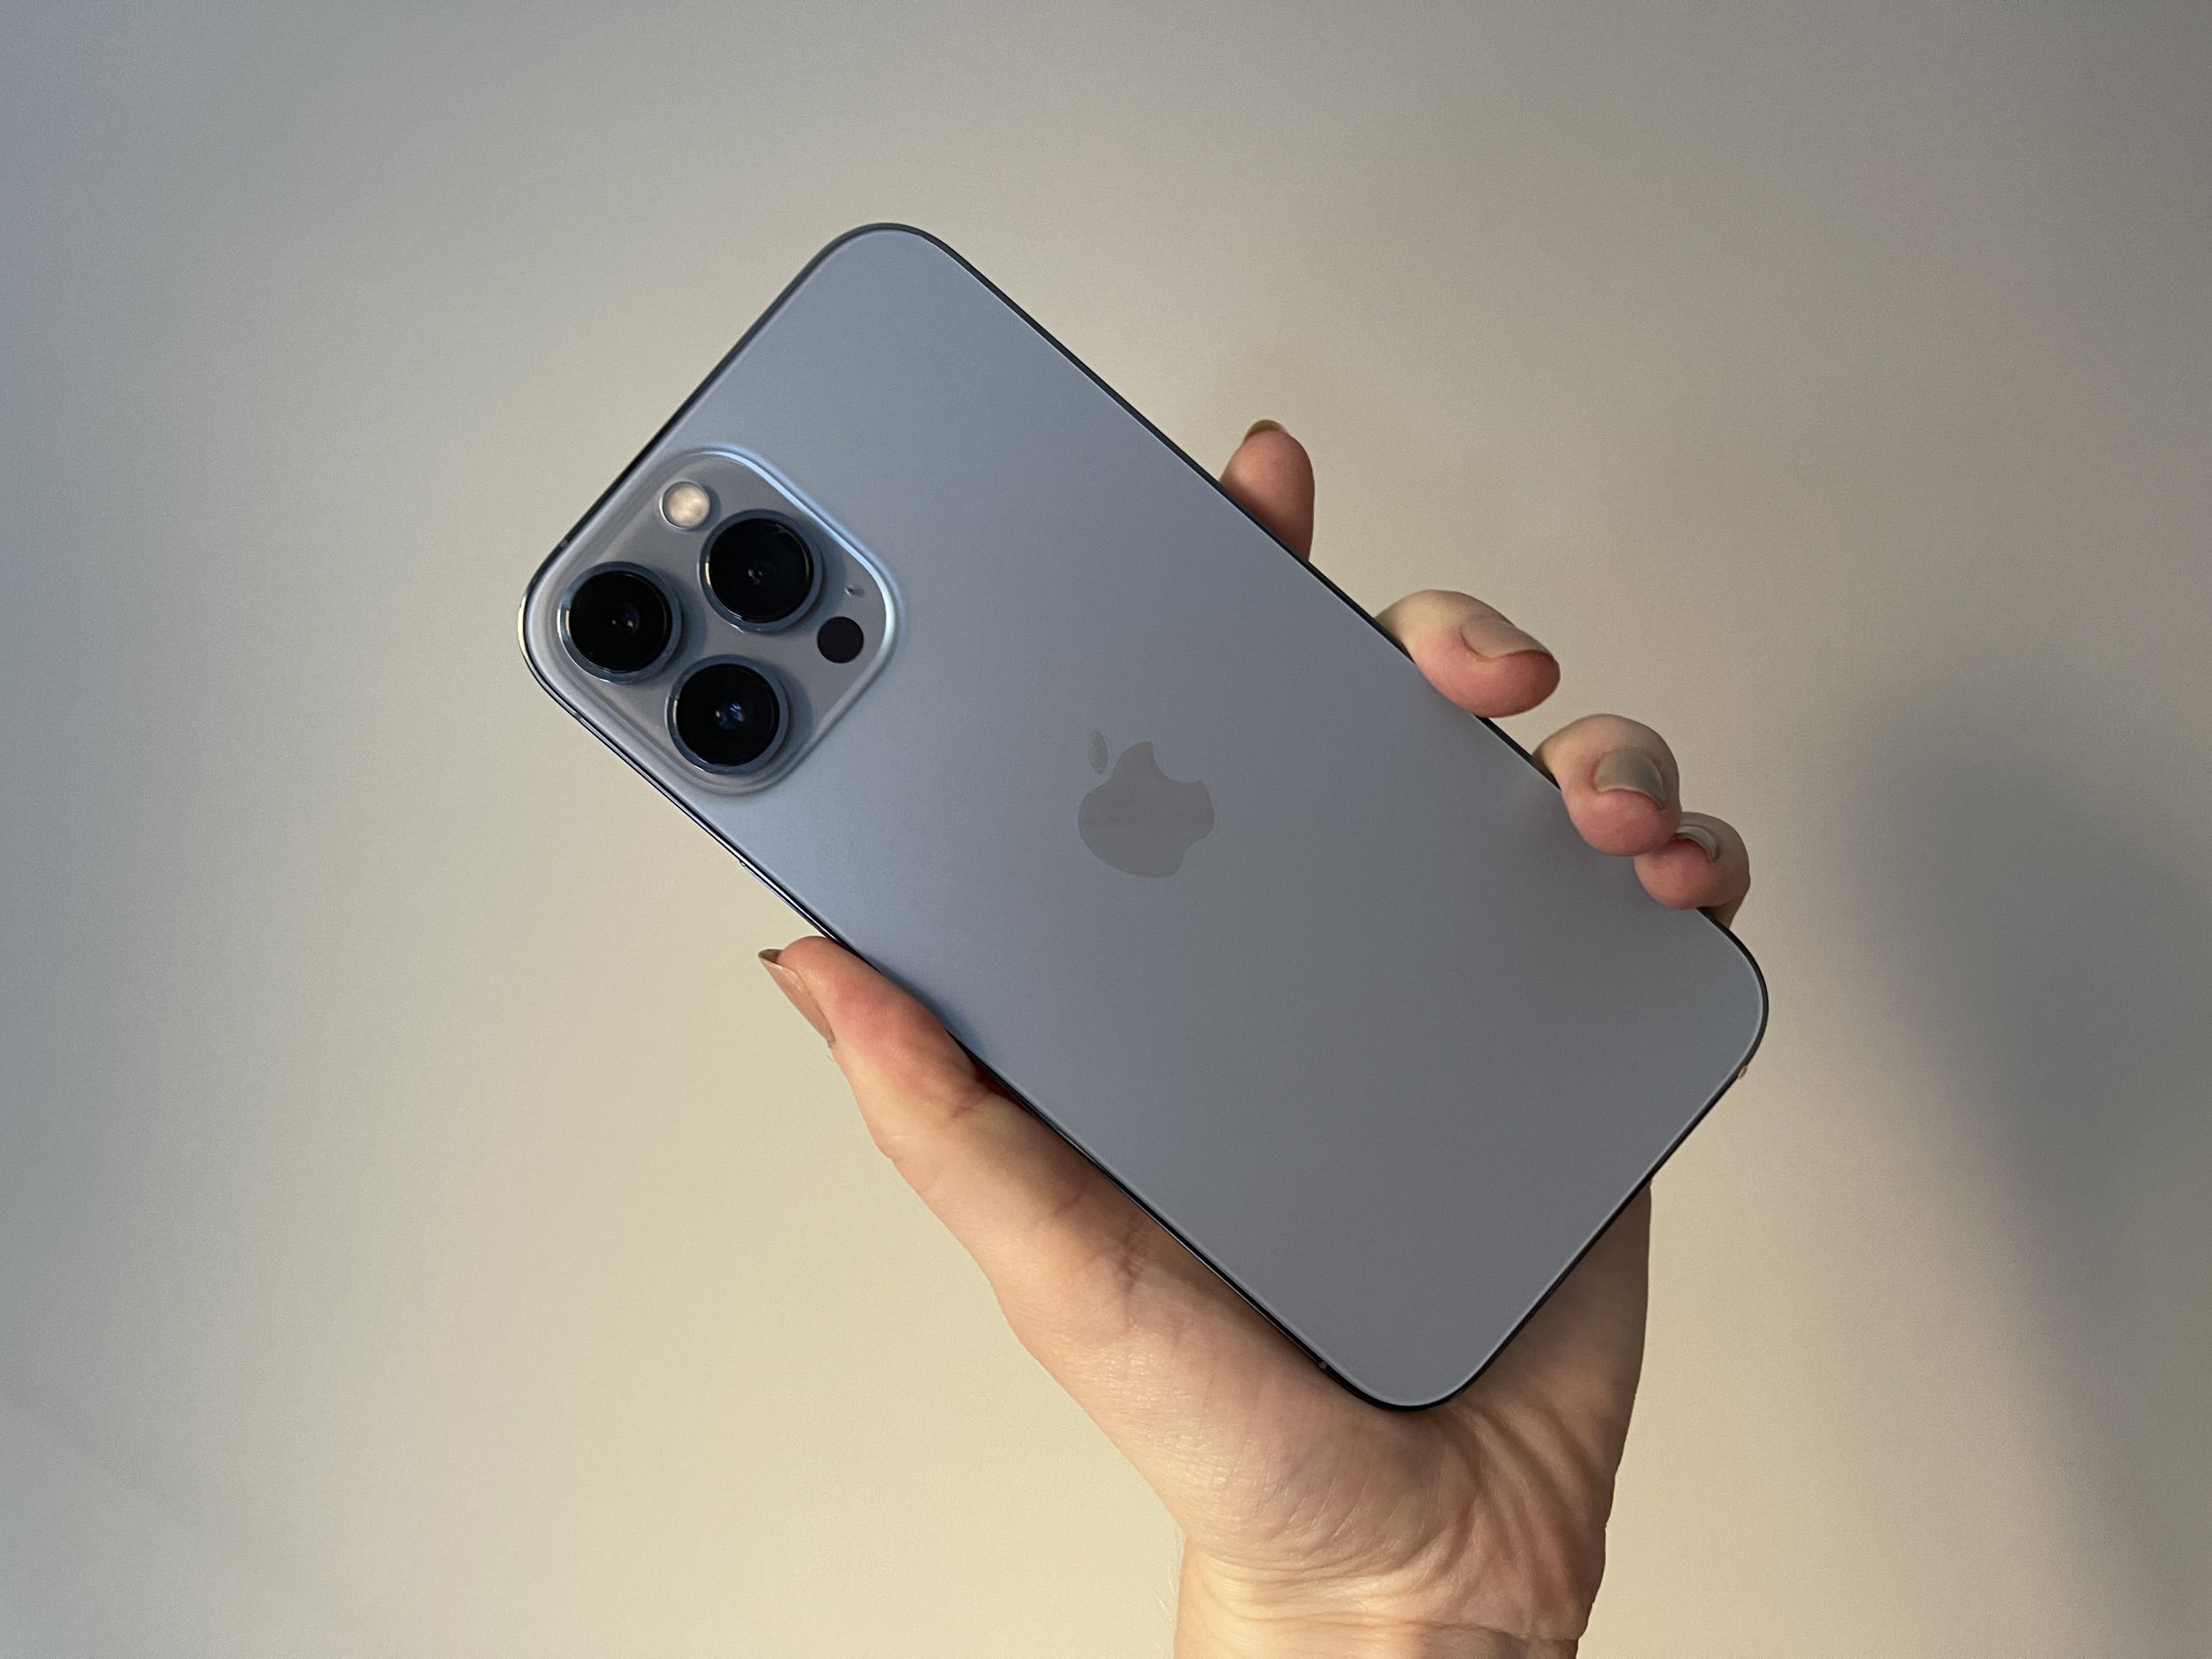 The debut of no-name and anti-premium for the iPhone 13 Pro Max: JerryRigEverything named the most durable and failing smartphones of 2021